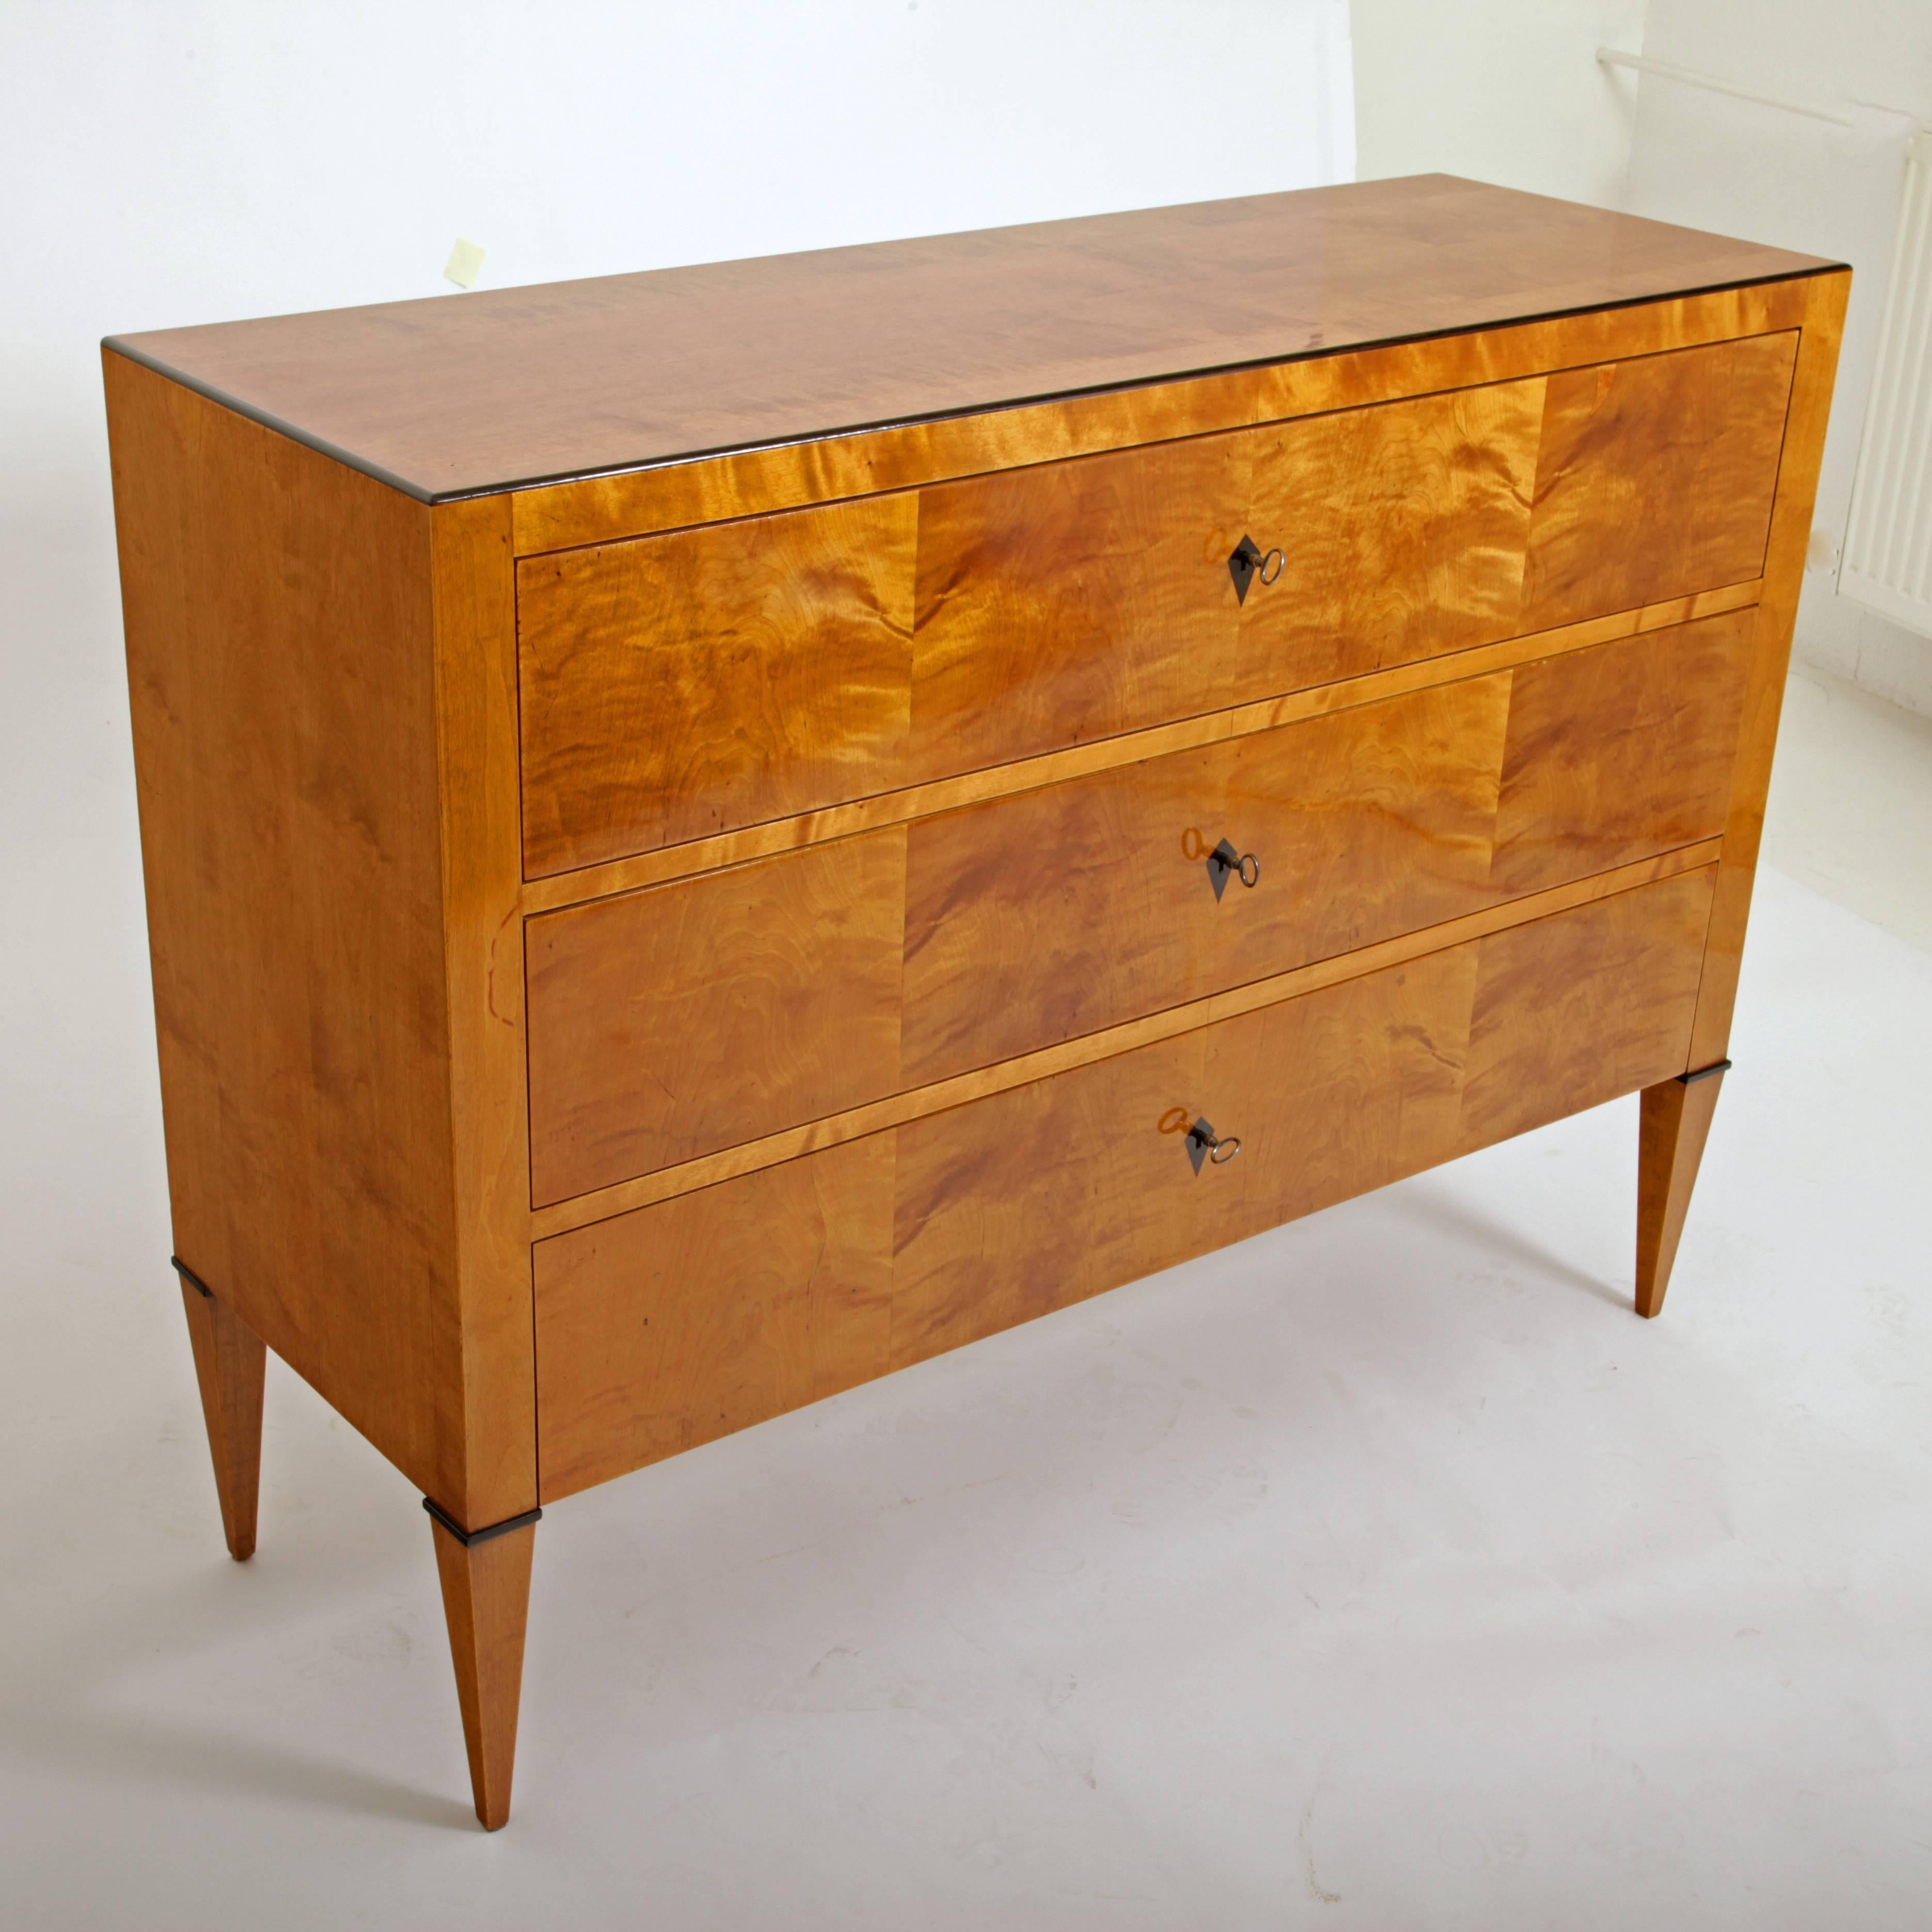 Early 20th Century Biedermeier-Style Chest of Drawers, Probably Italy, circa 1900